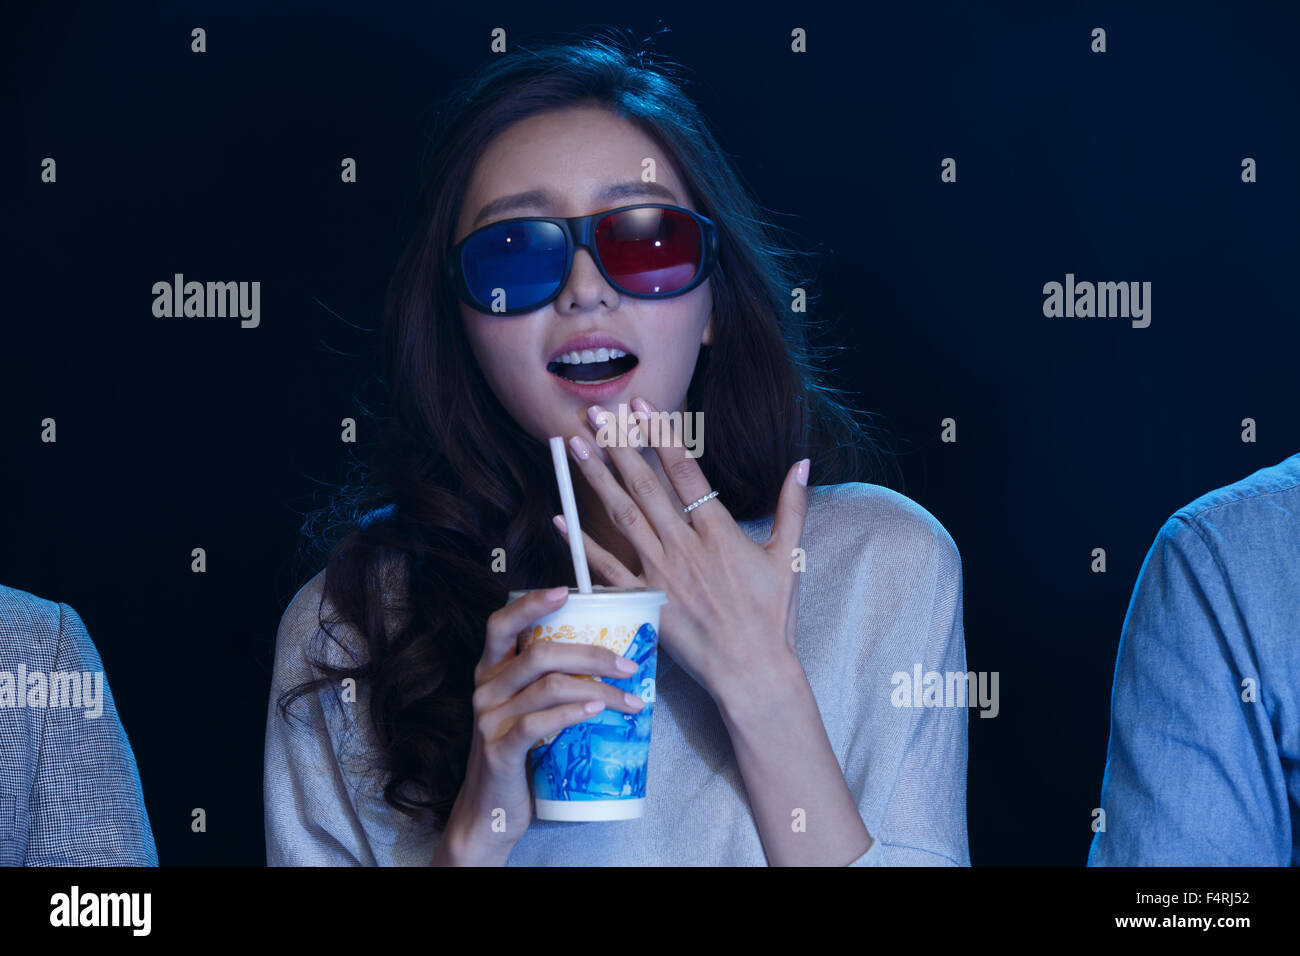 A young woman is watching a movie in the cinema. Stock Photo